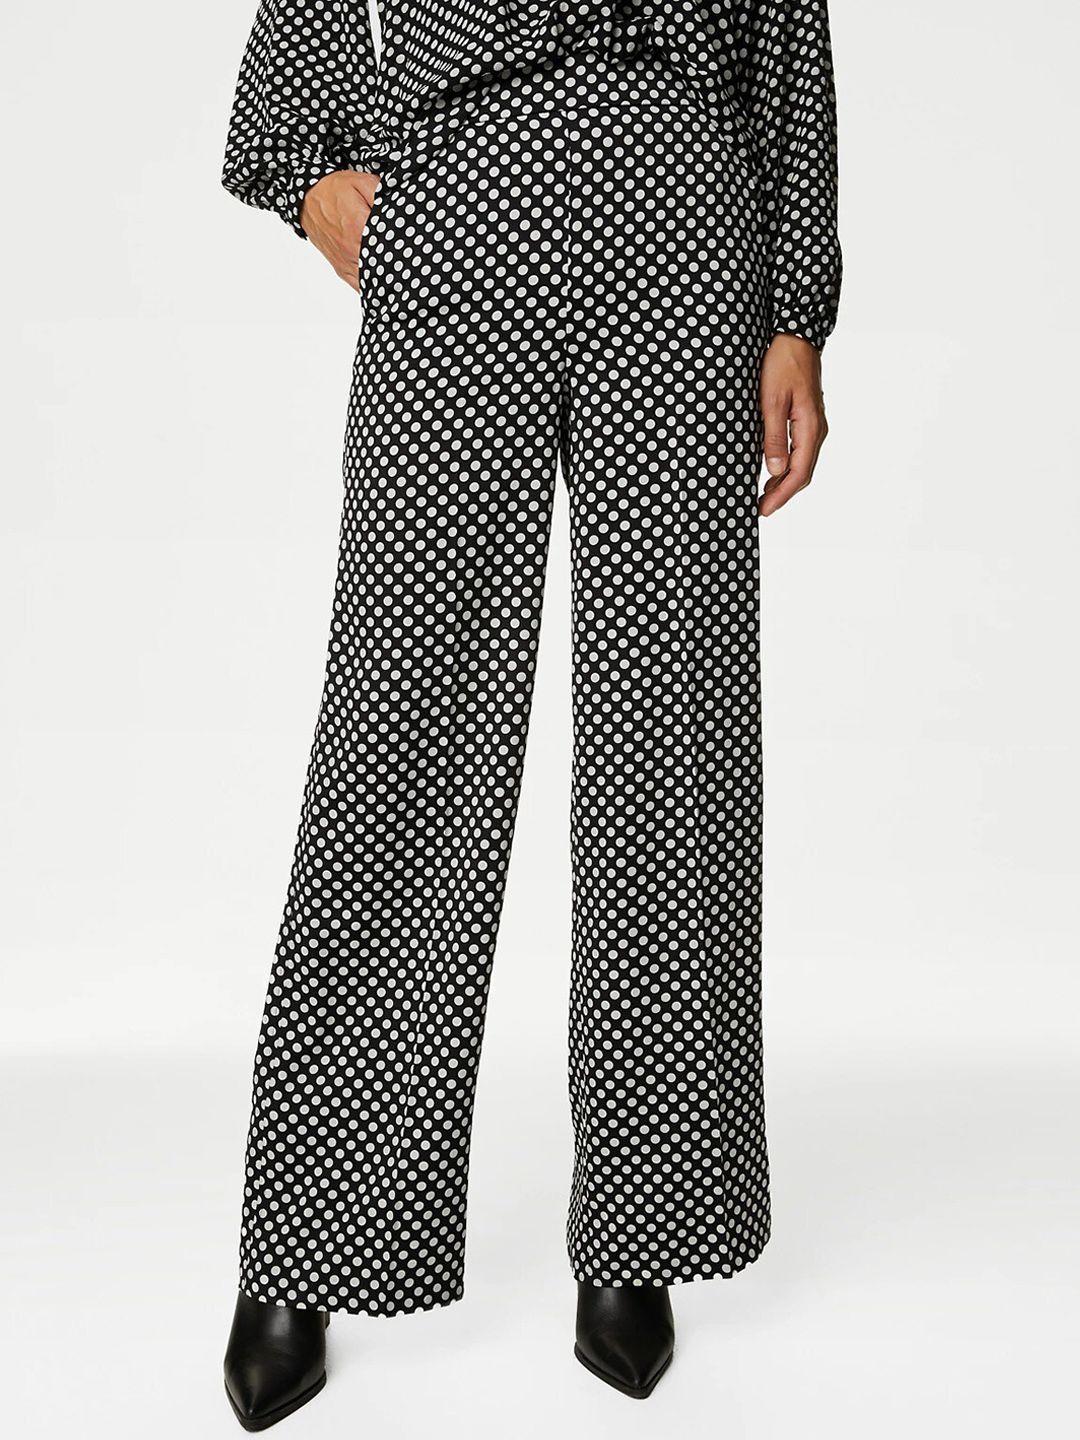 marks & spencer women polka dot printed flared high-rise parallel trousers